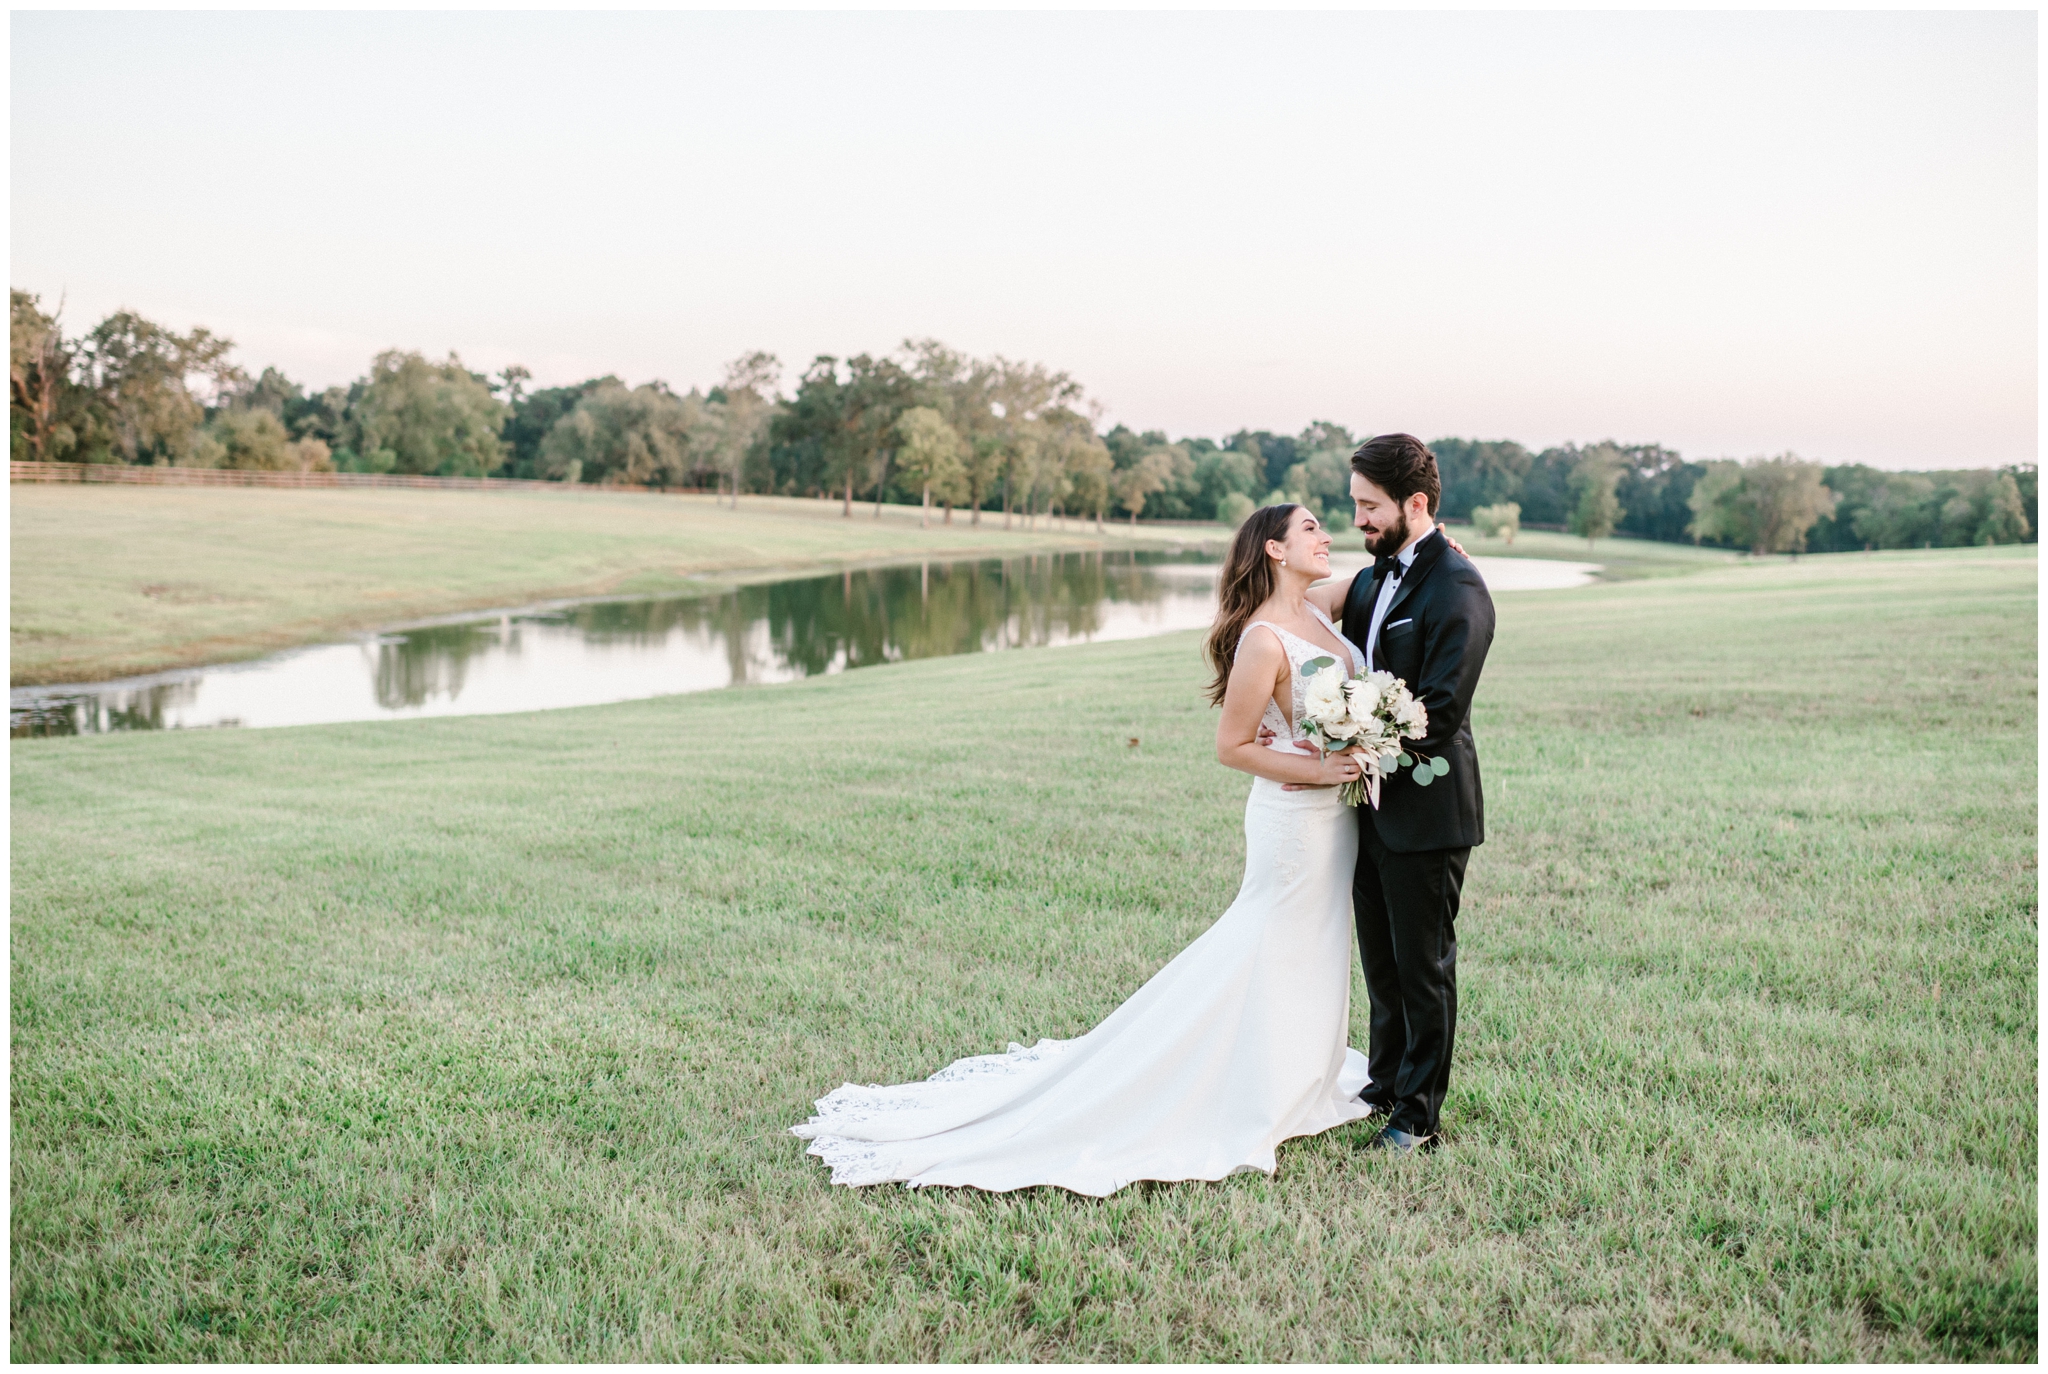 Dusty blue and ivory wedding at The Farmhouse in Montgomery, Texas